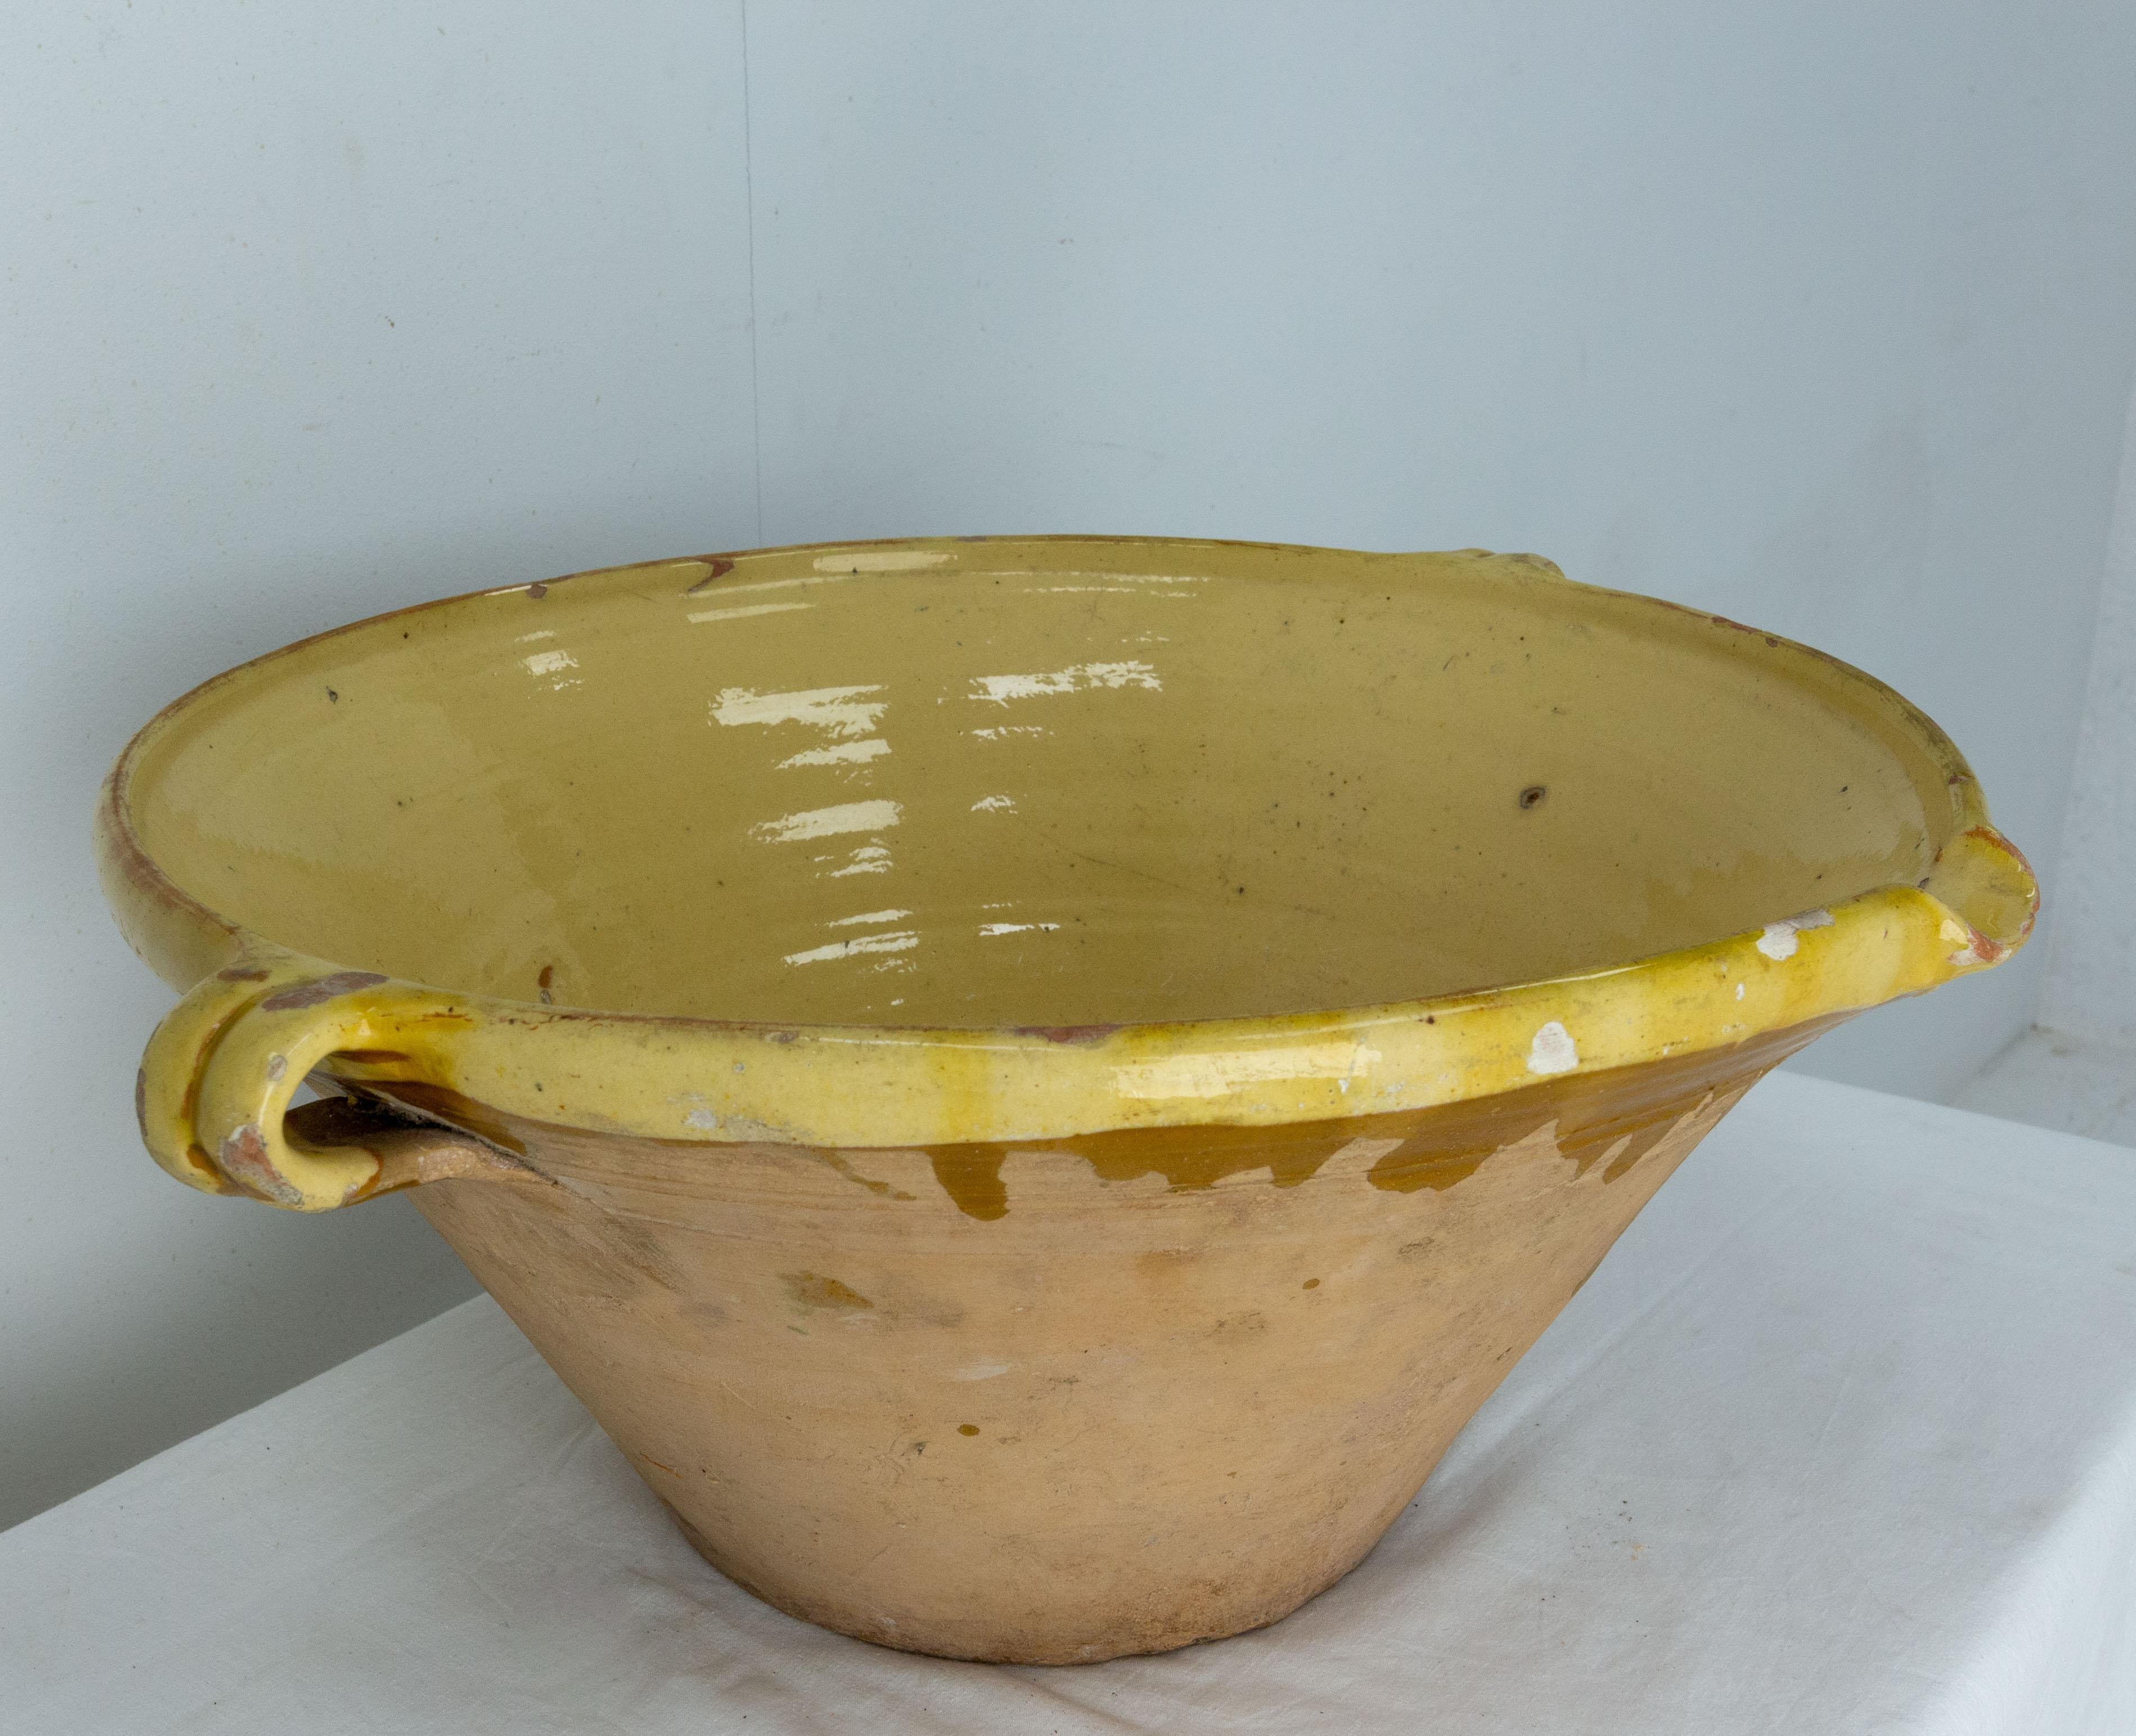 French Provincial French Terracotta Confit Tian or Bowl Glazed